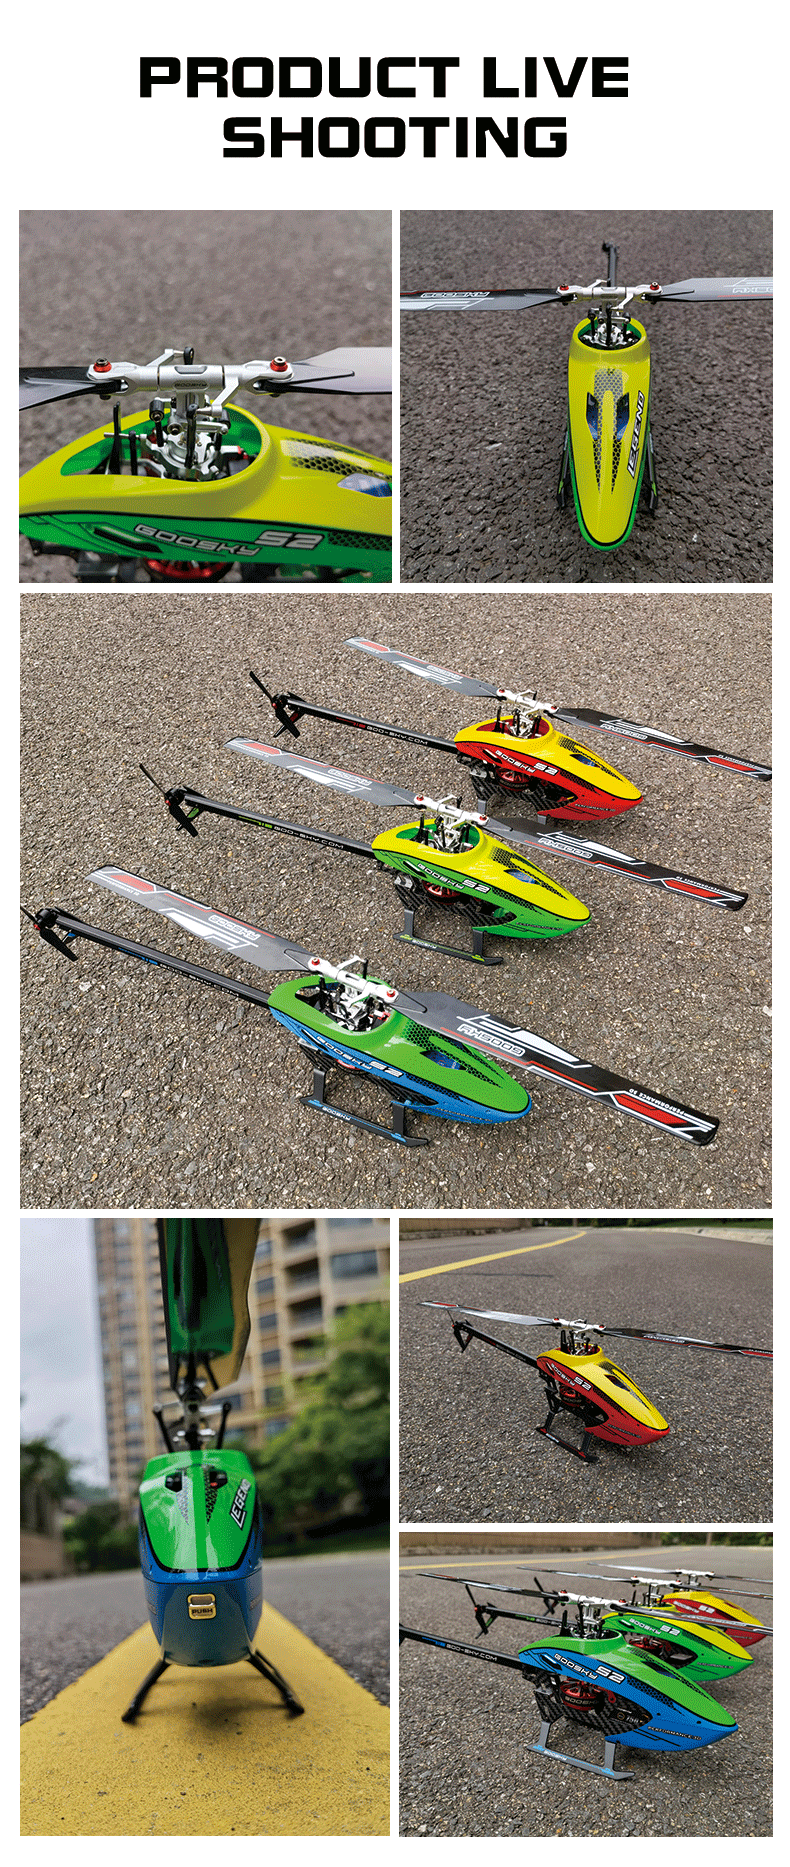 GOOSKY S2 6CH 3D Aerobatic Dual Brushless Direct Drive Motor RC Helicopter BNF with GTS Flight Control System